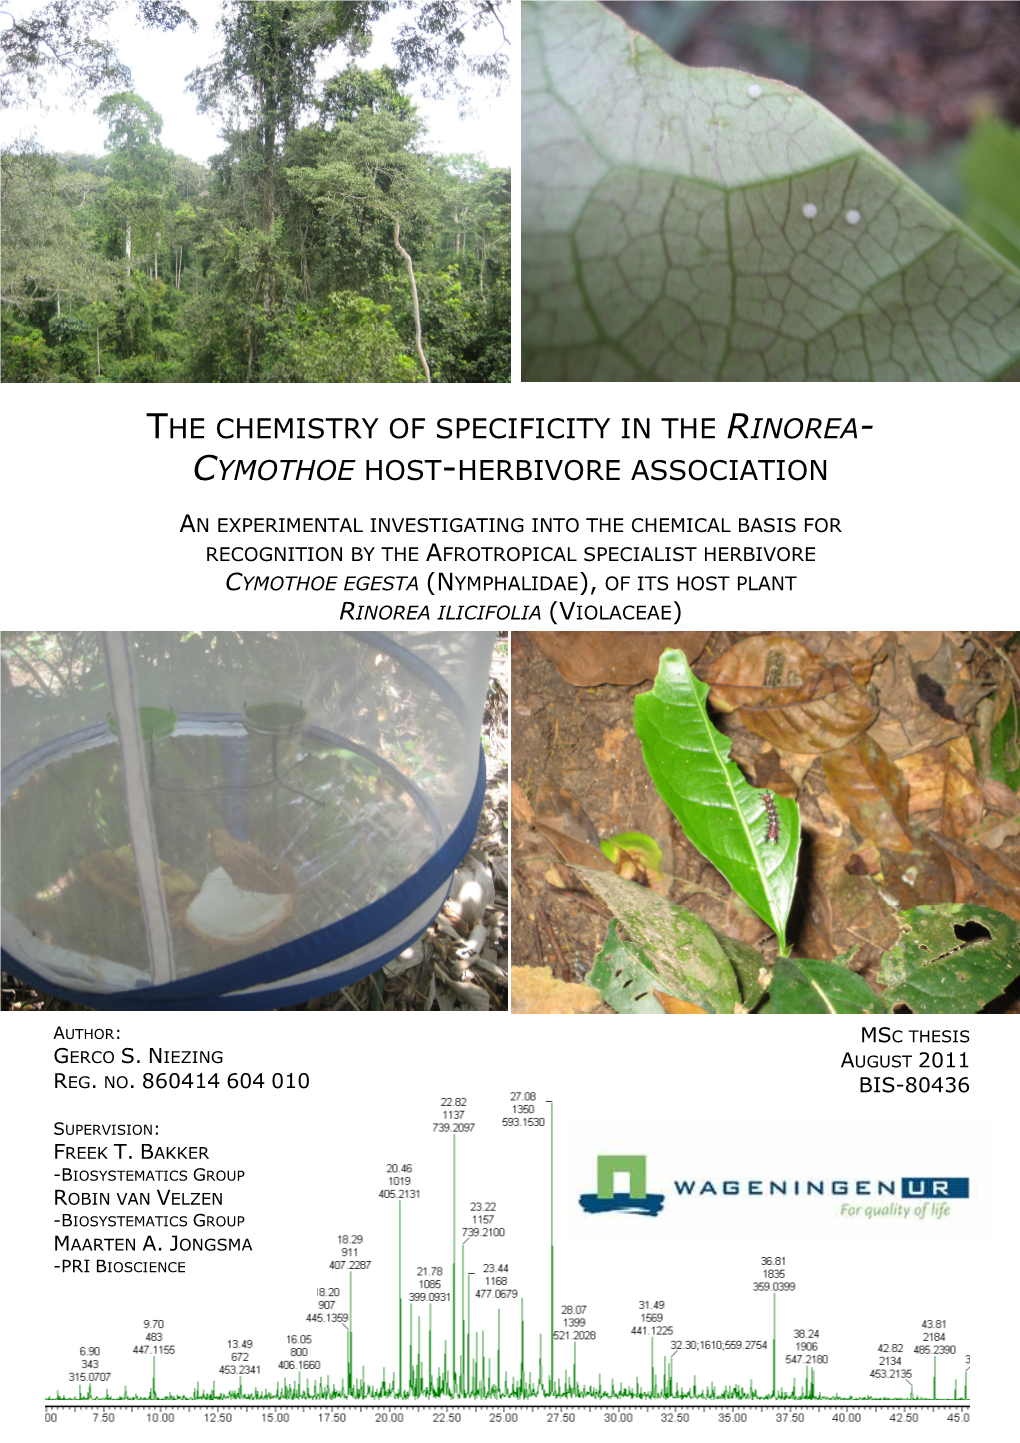 The Chemistry of Specificity in the Rinorea- Cymothoe Host-Herbivore